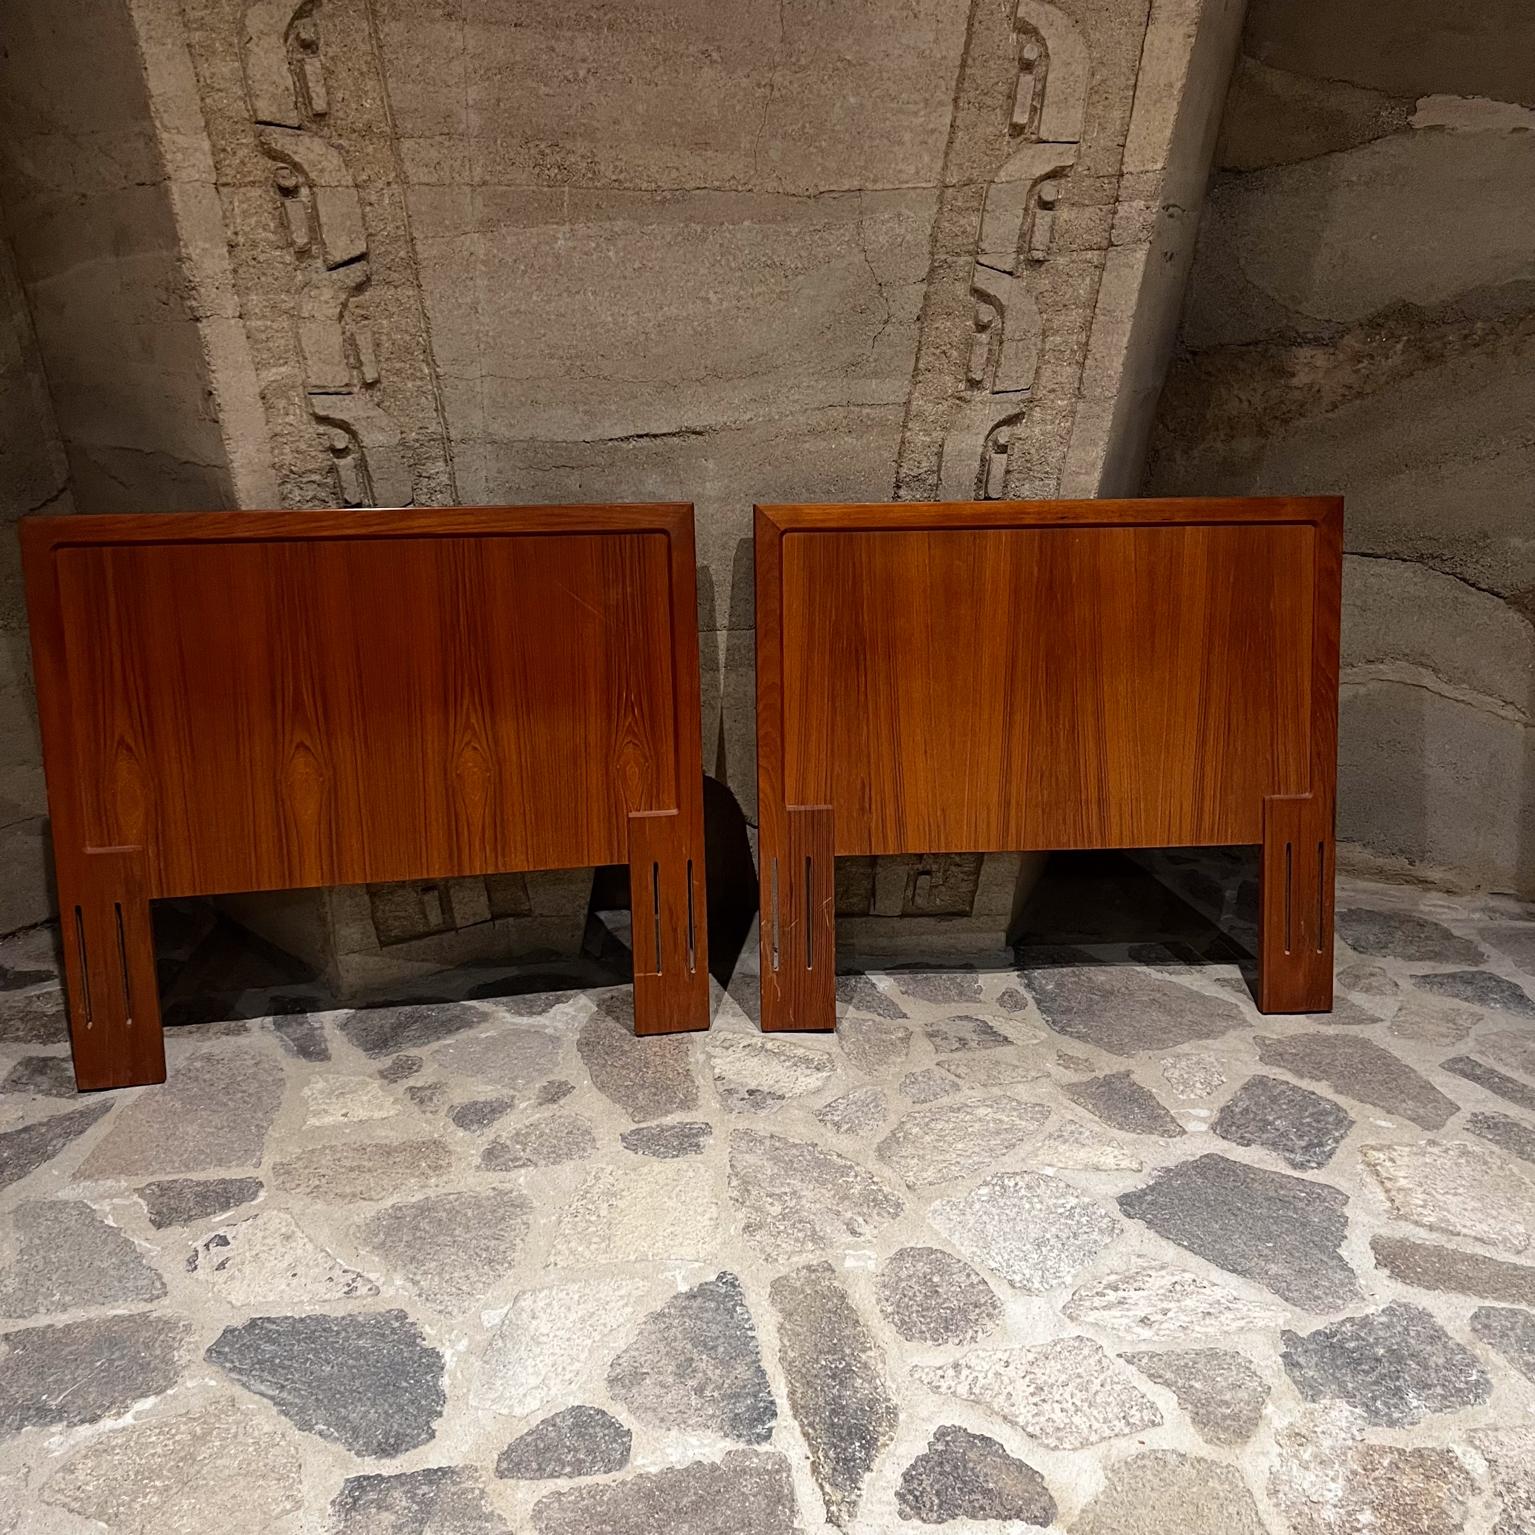 Twin Teak Headboards by Vinde Mobelfabrik. 
(can double up to configure as a king headboard)
Maker stamped. Denmark 75.
after Moreddi.
One headboard has minor scuffs upper right corner.
Original preowned vintage unrestored condition.
Refer to images